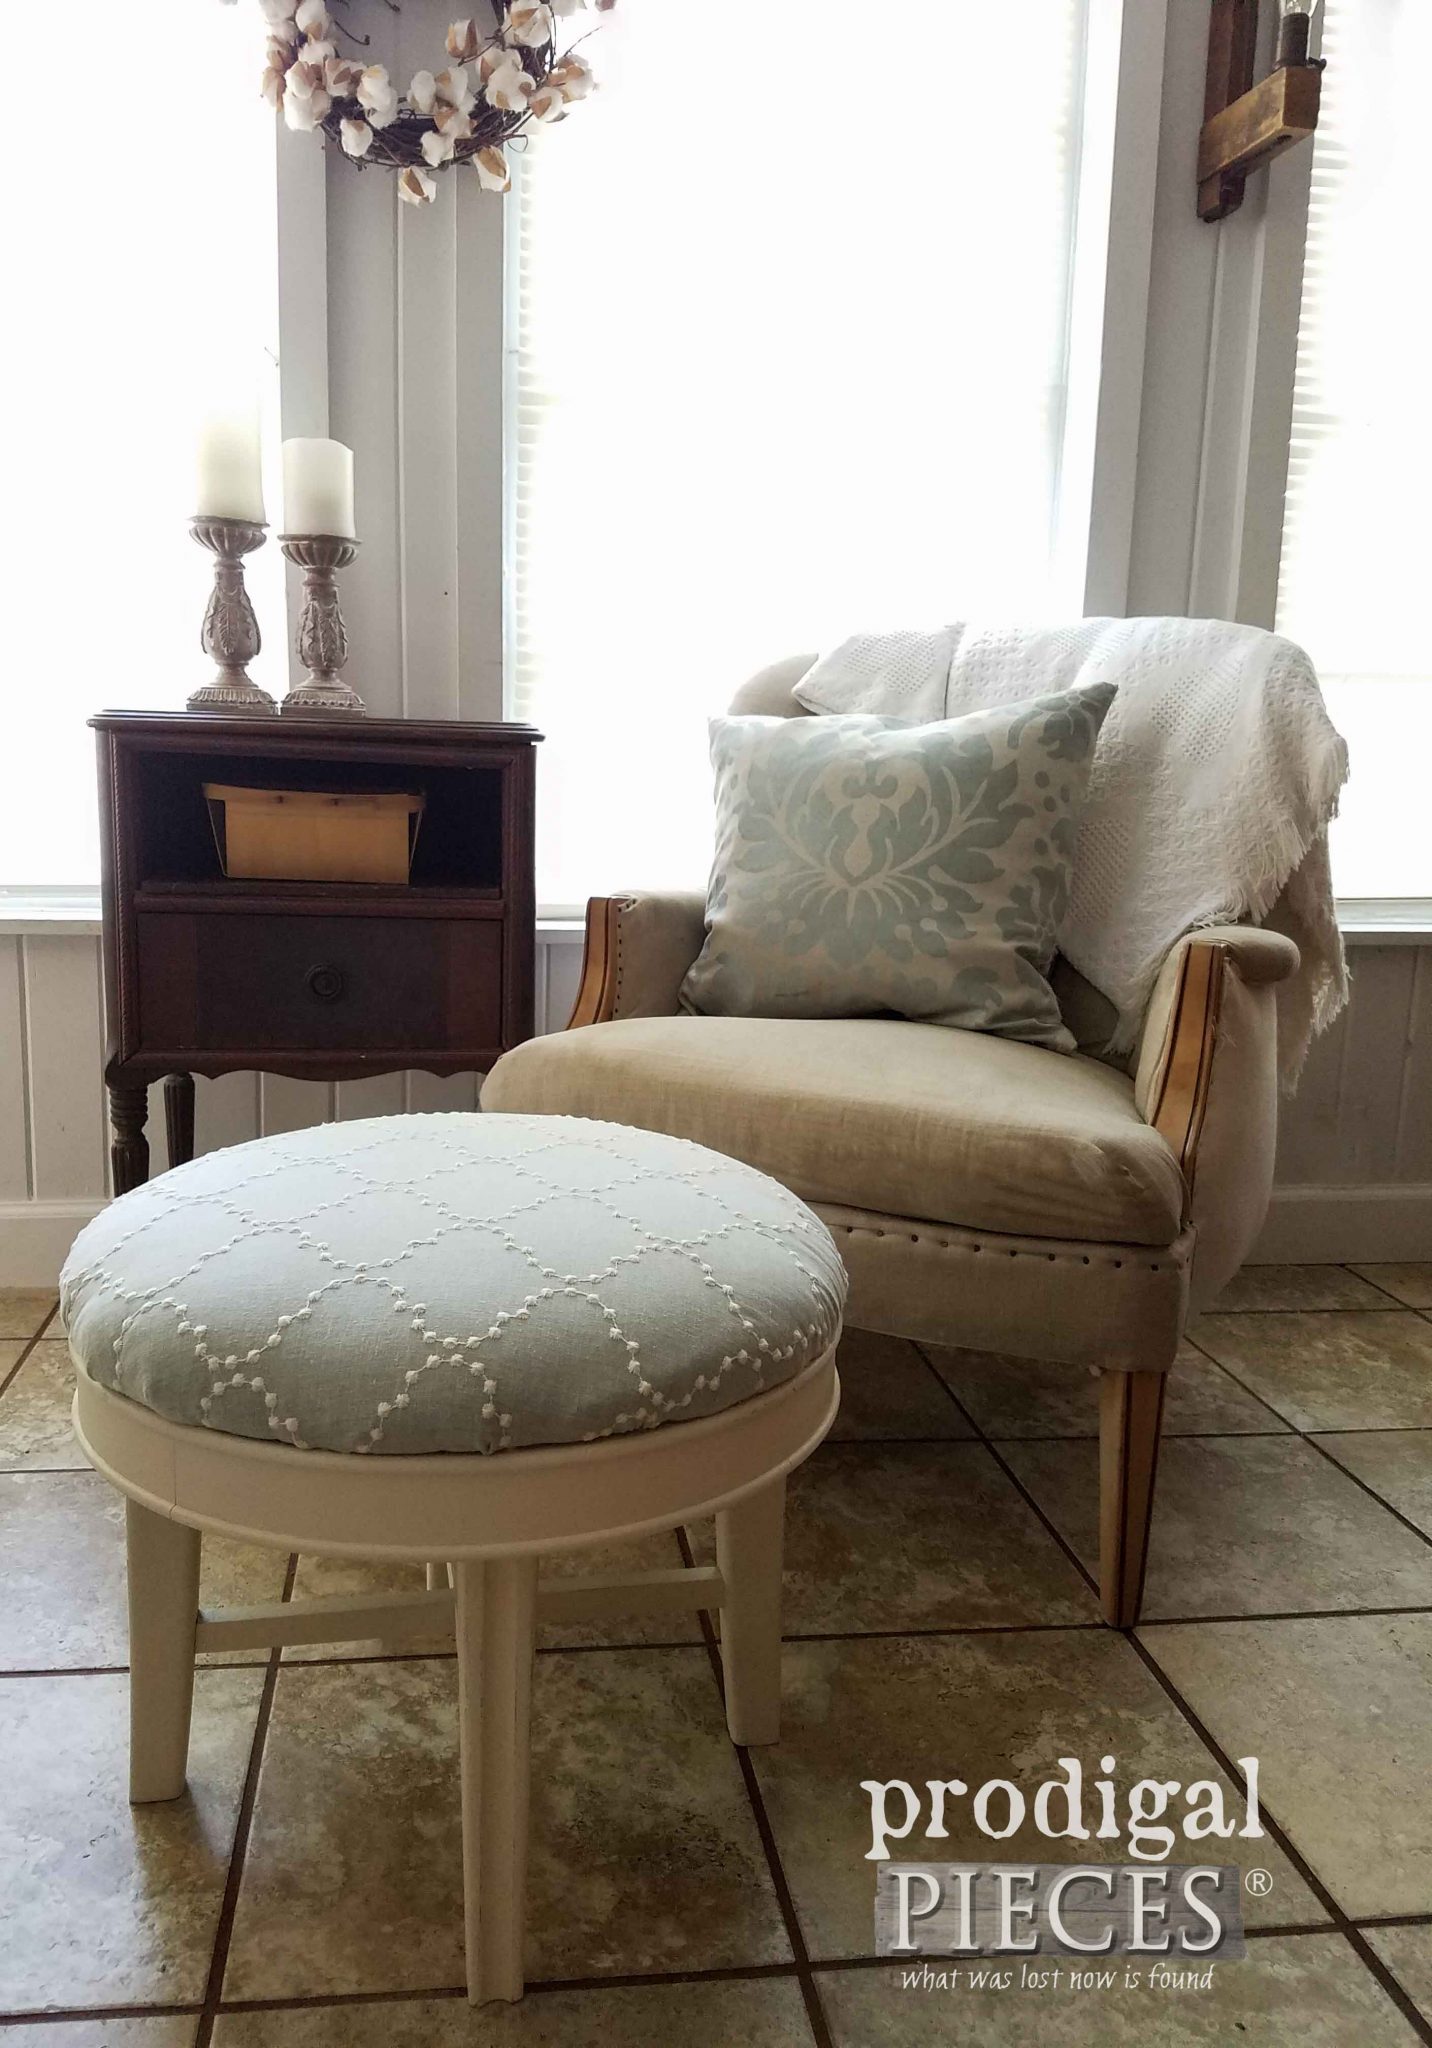 Vintage Ottoman and Chair refreshed with upholstery and paint. DIY at prodigalpieces.com